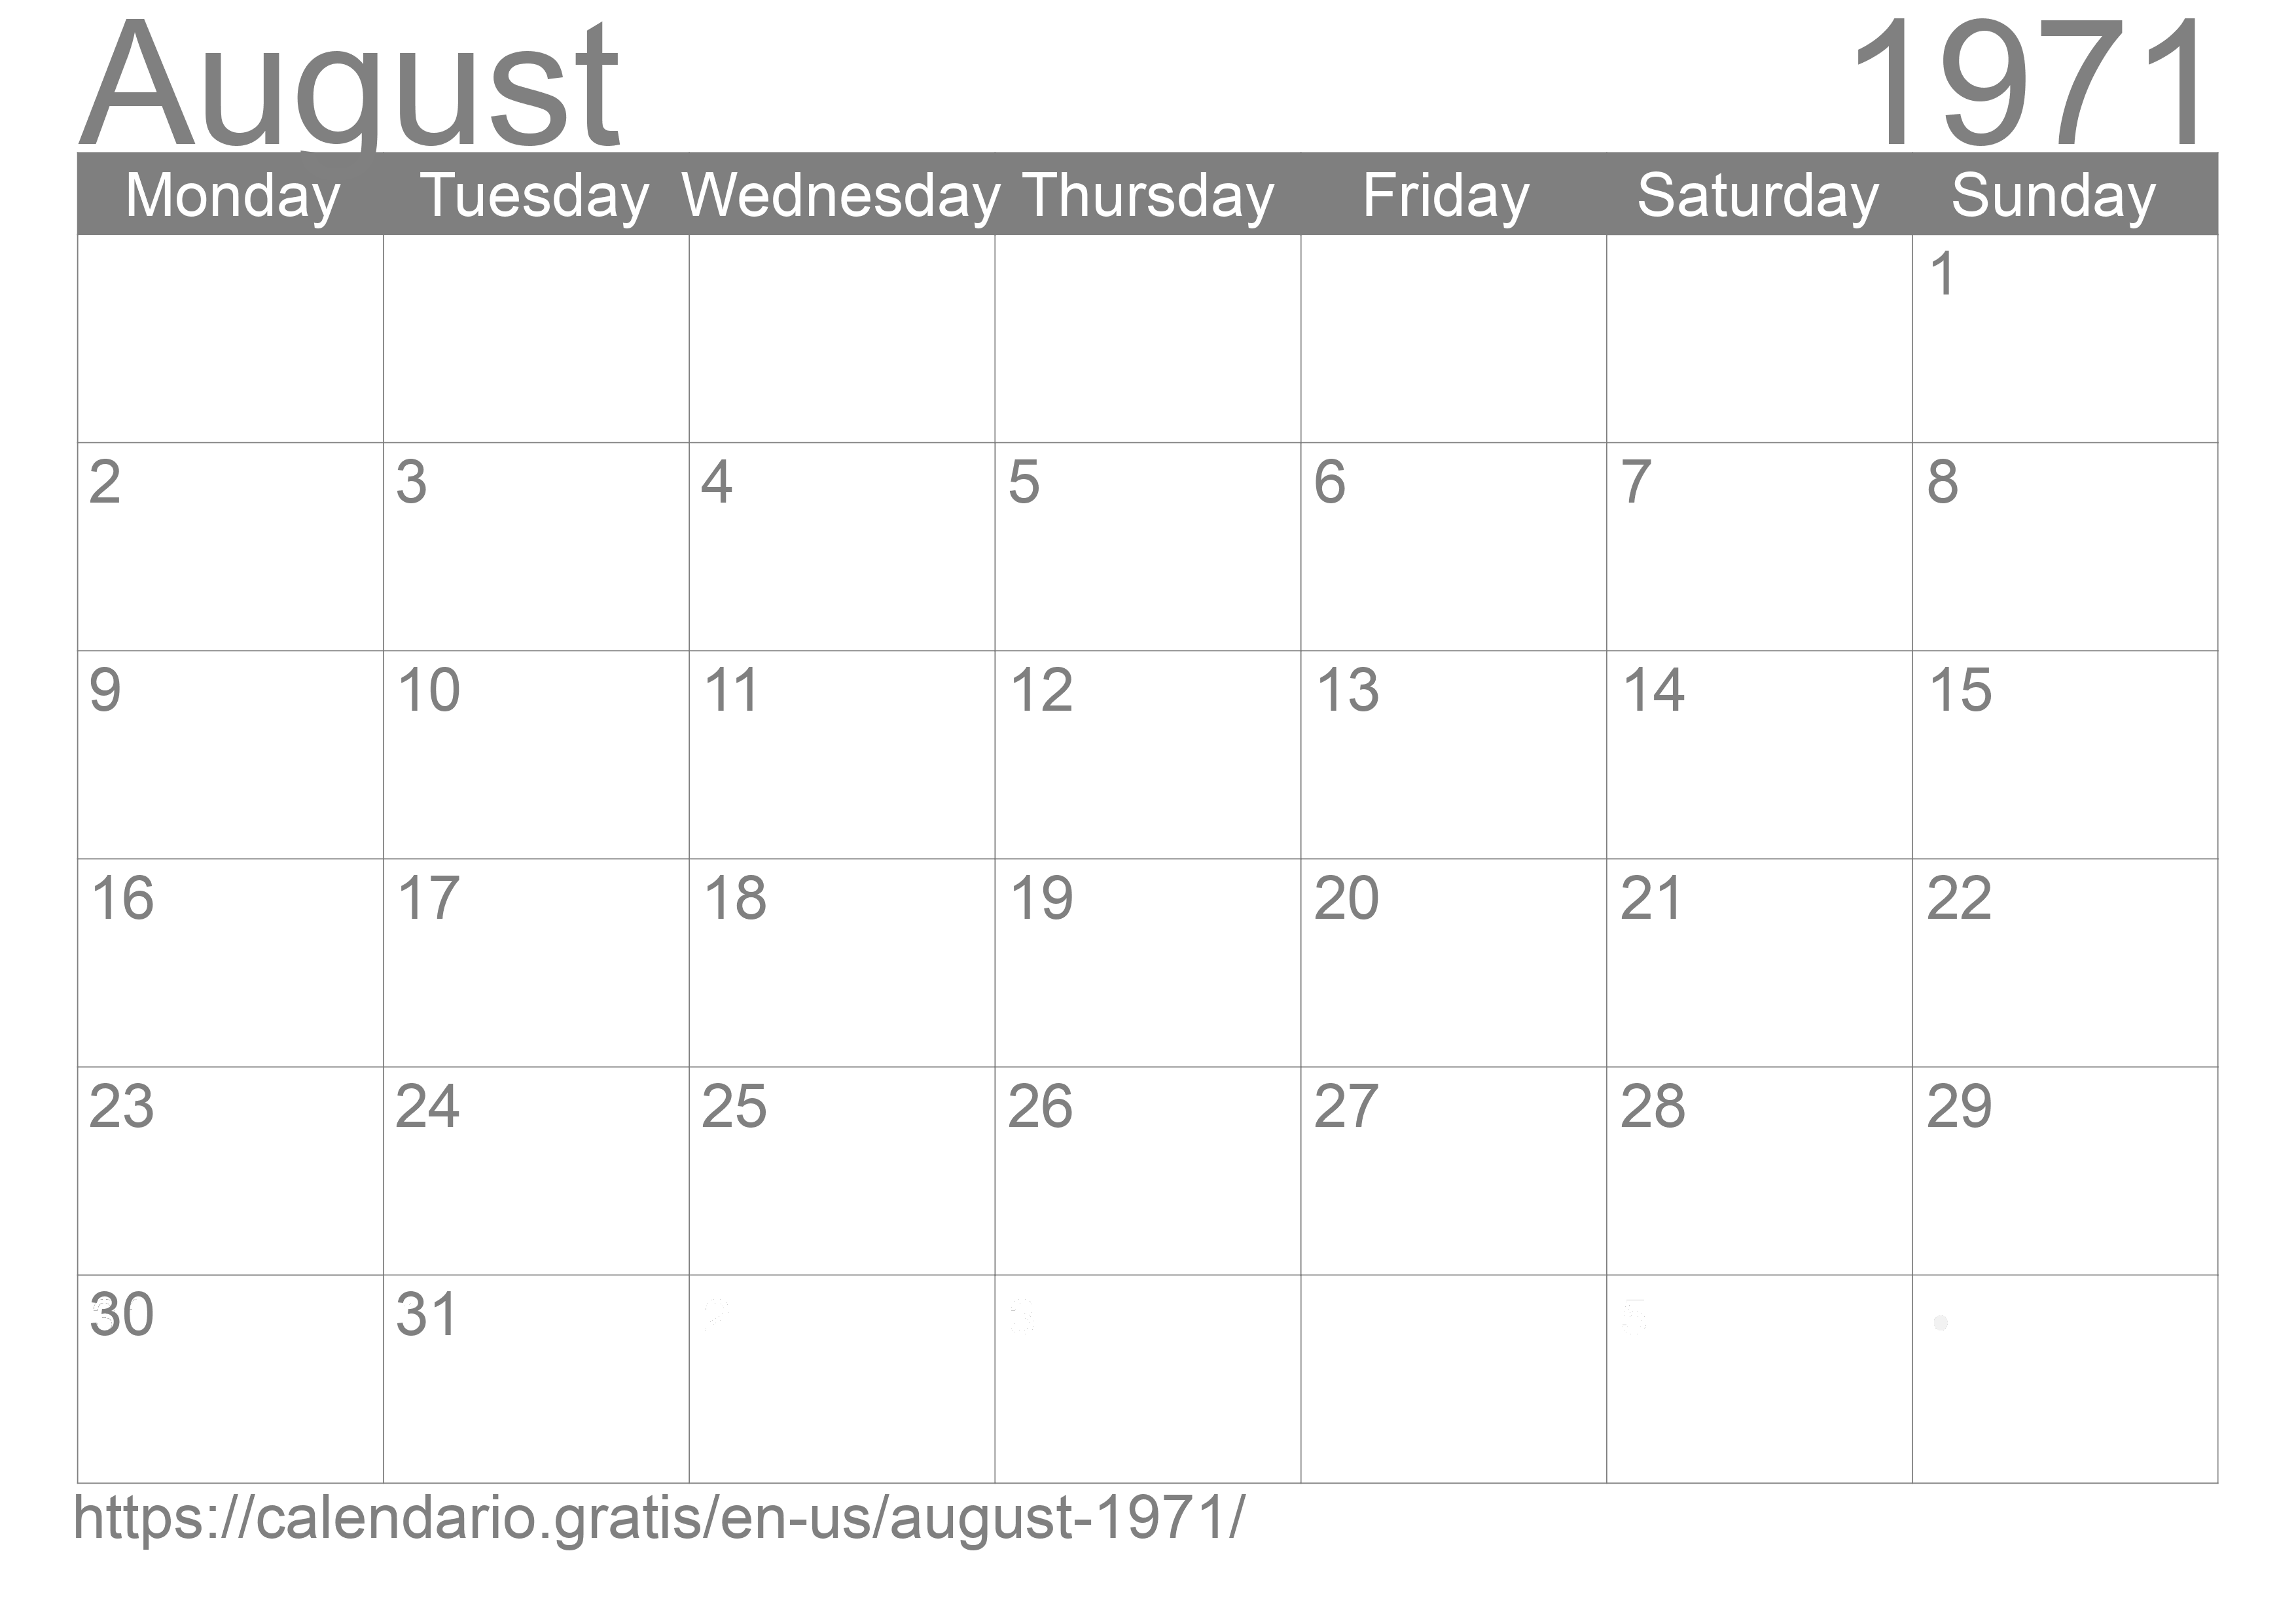 Calendar August 1971 from United States of America in English ☑️